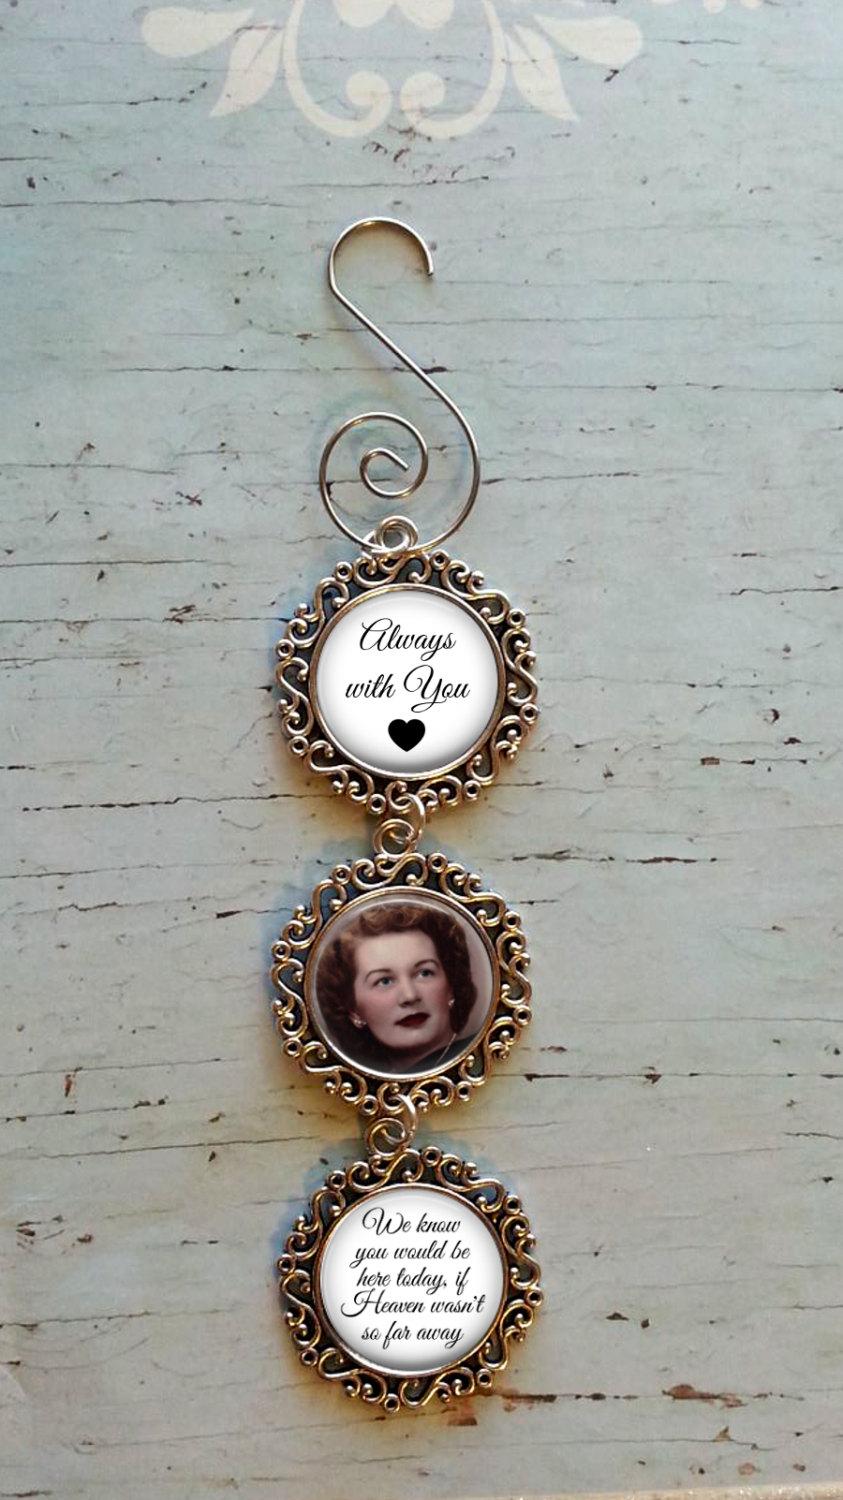 Wedding - SALE - Thru Midnight 12/16! Memorial Ornament Personalized with Photo - Christmas Ornament